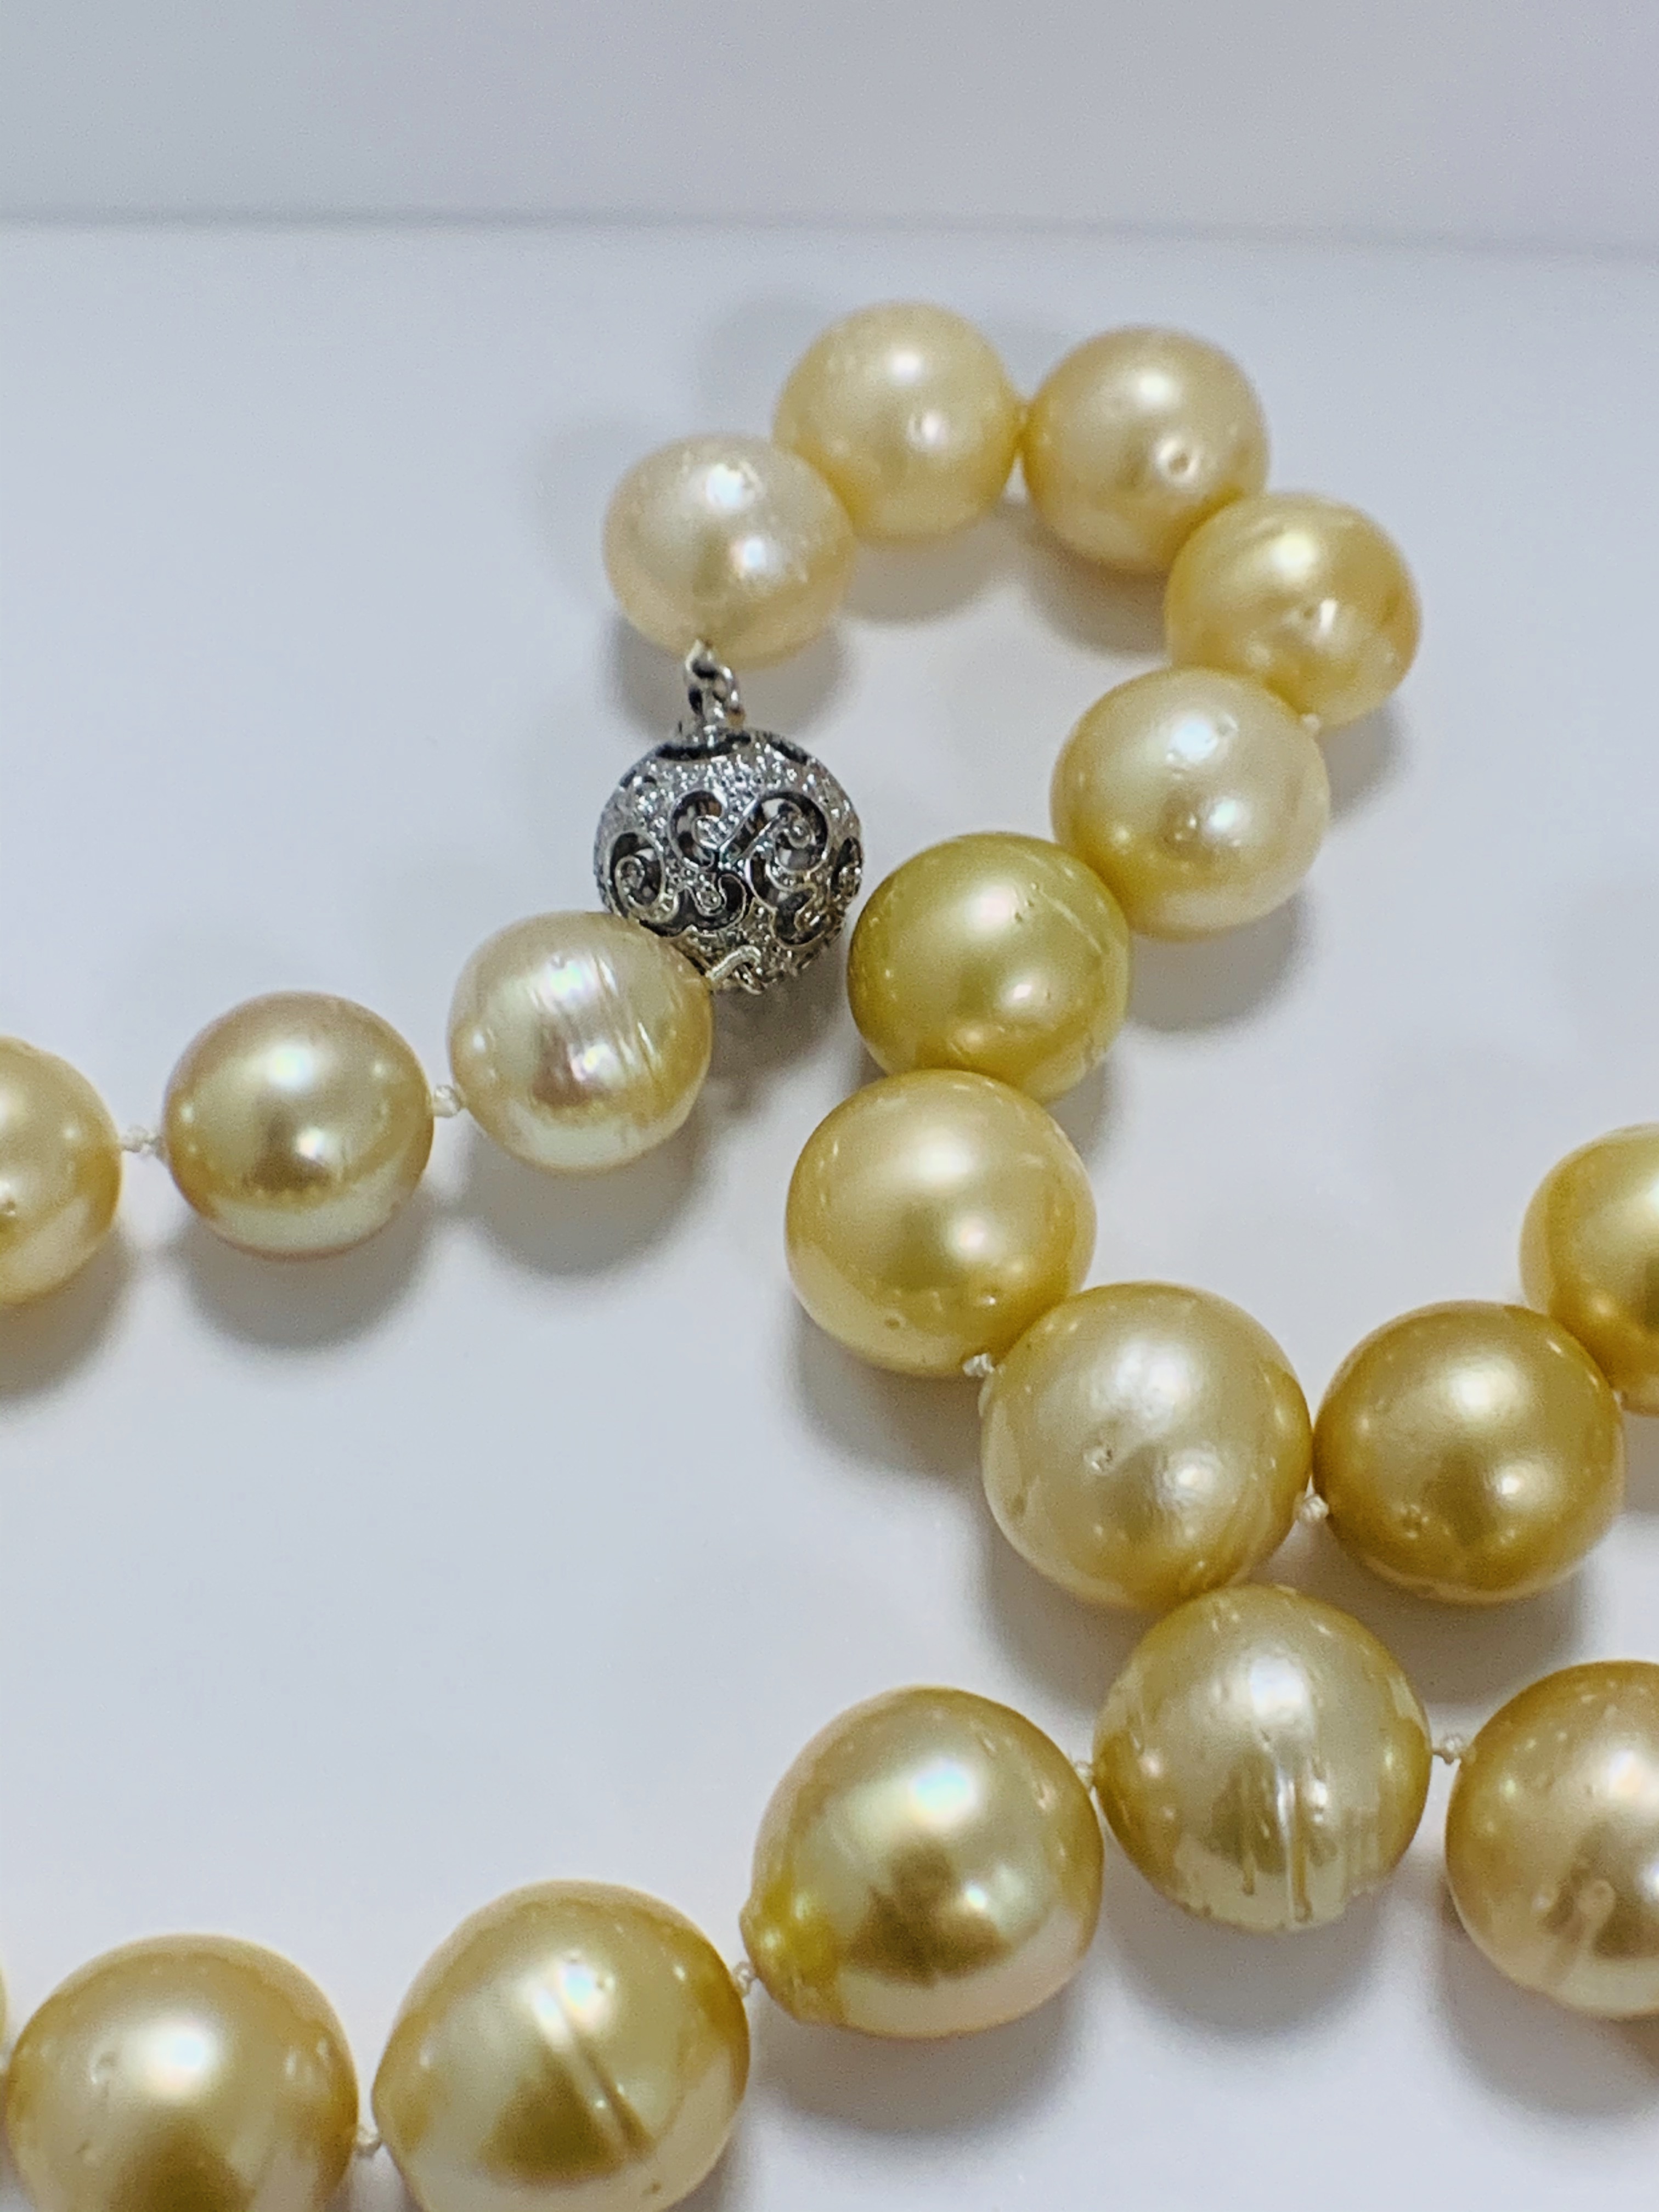 Pearl and Diamond necklace strand featuring, 33 South Sea Pearls, with 4 round brilliant cut Diamond - Image 2 of 13